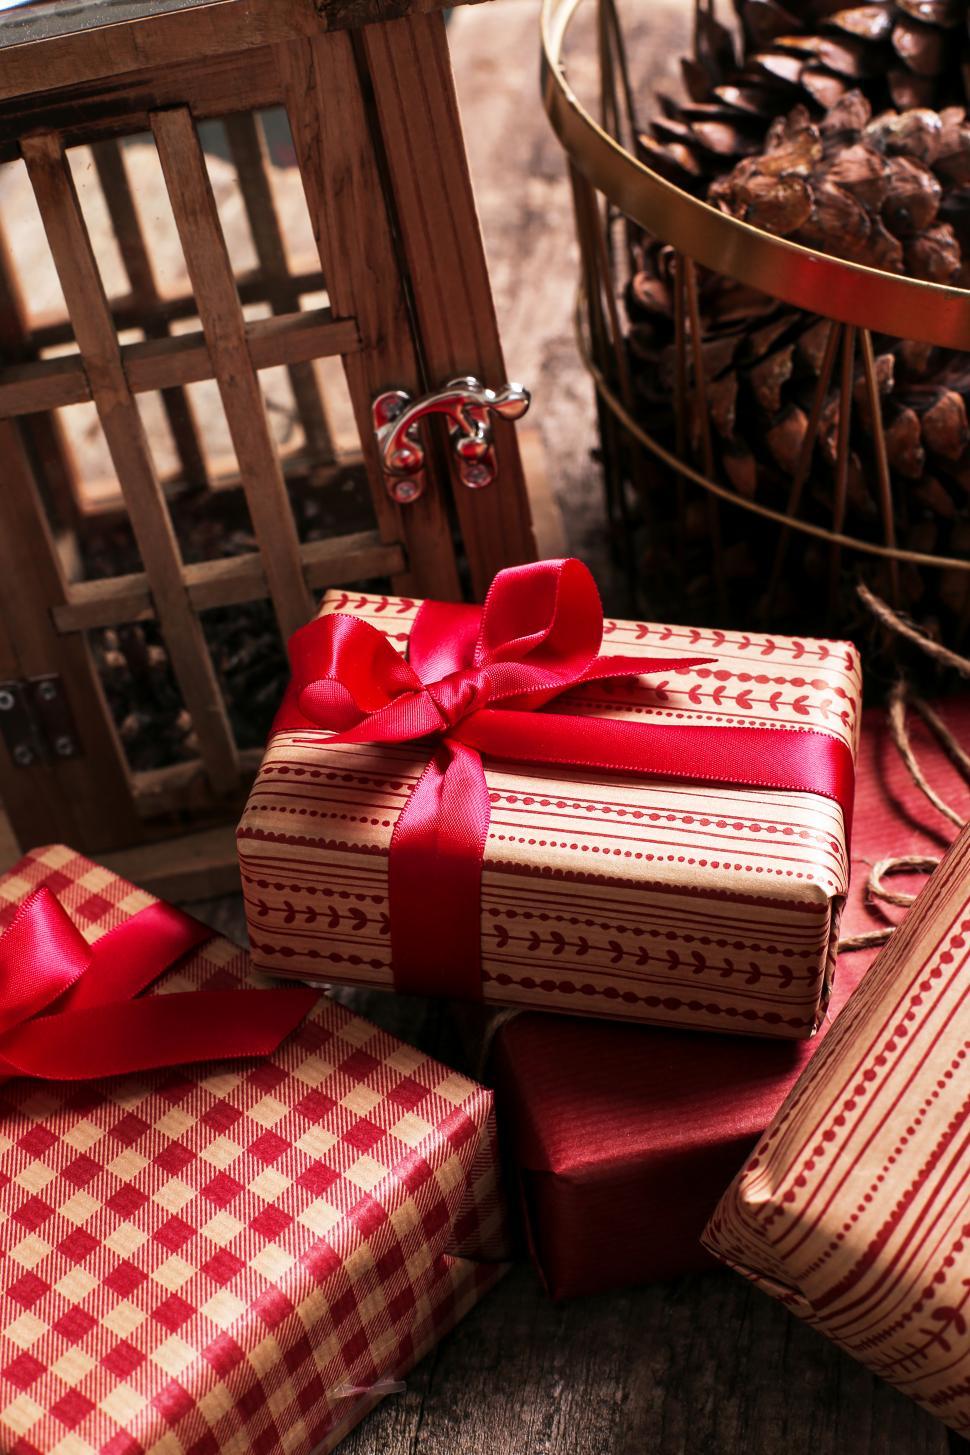 Free Image of Wrapped gifts in a pile 